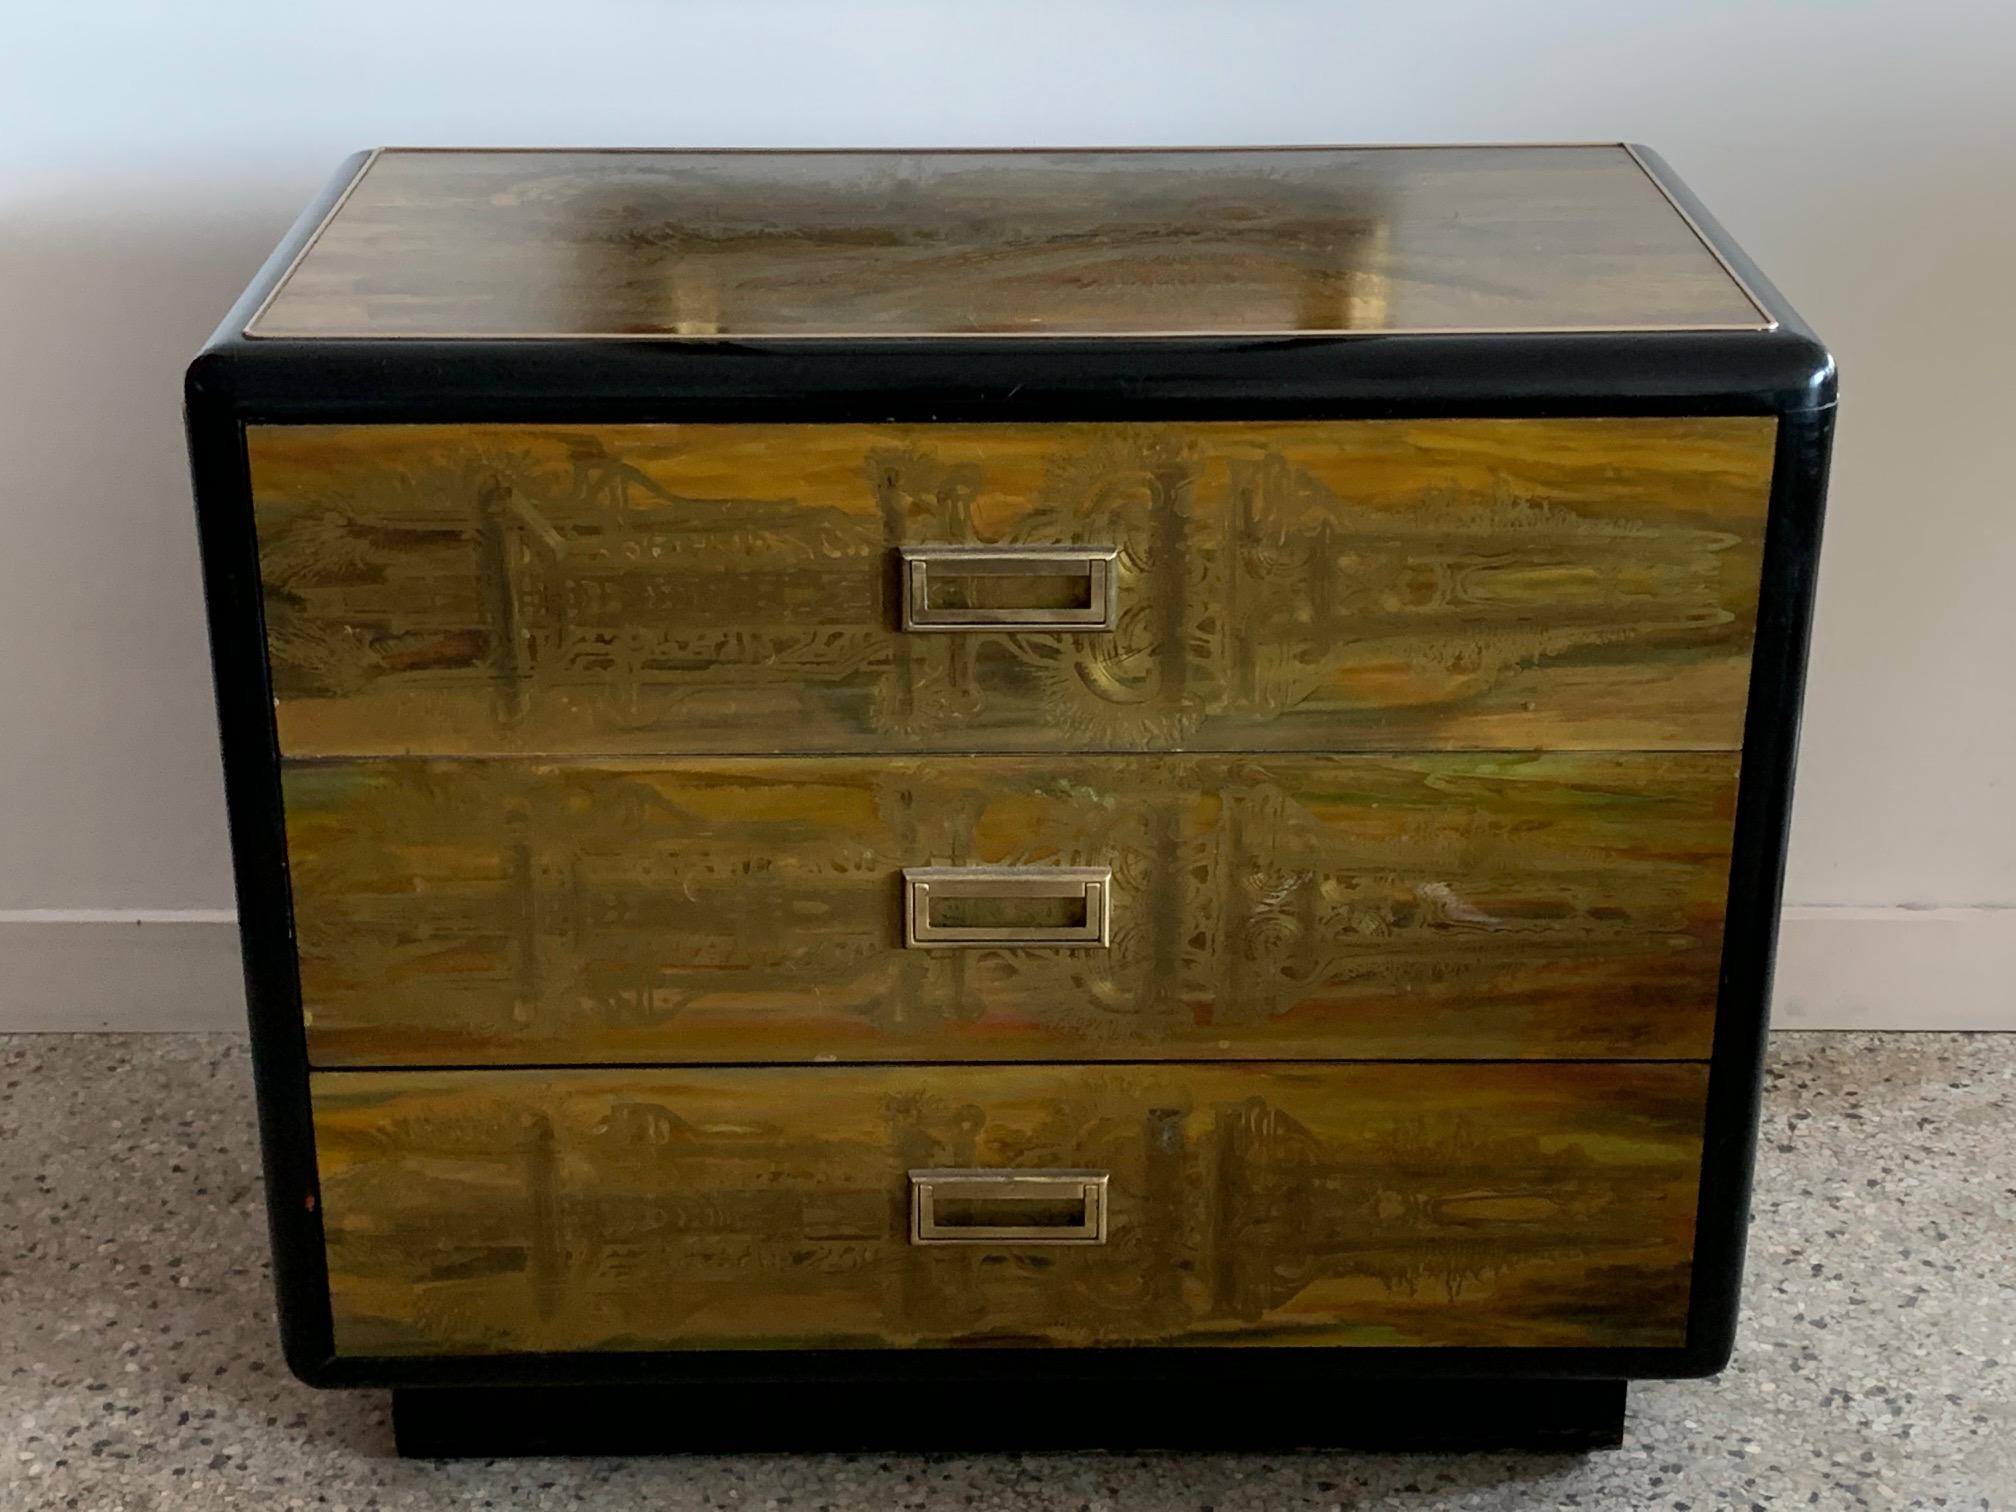 A great 1960s three-drawer chest of drawers and matching mirror by Bernhard Rohne for Mastercraft. Acid etched brass and lacquered wood, with rounded corners on the chest. The mirror is not attached.